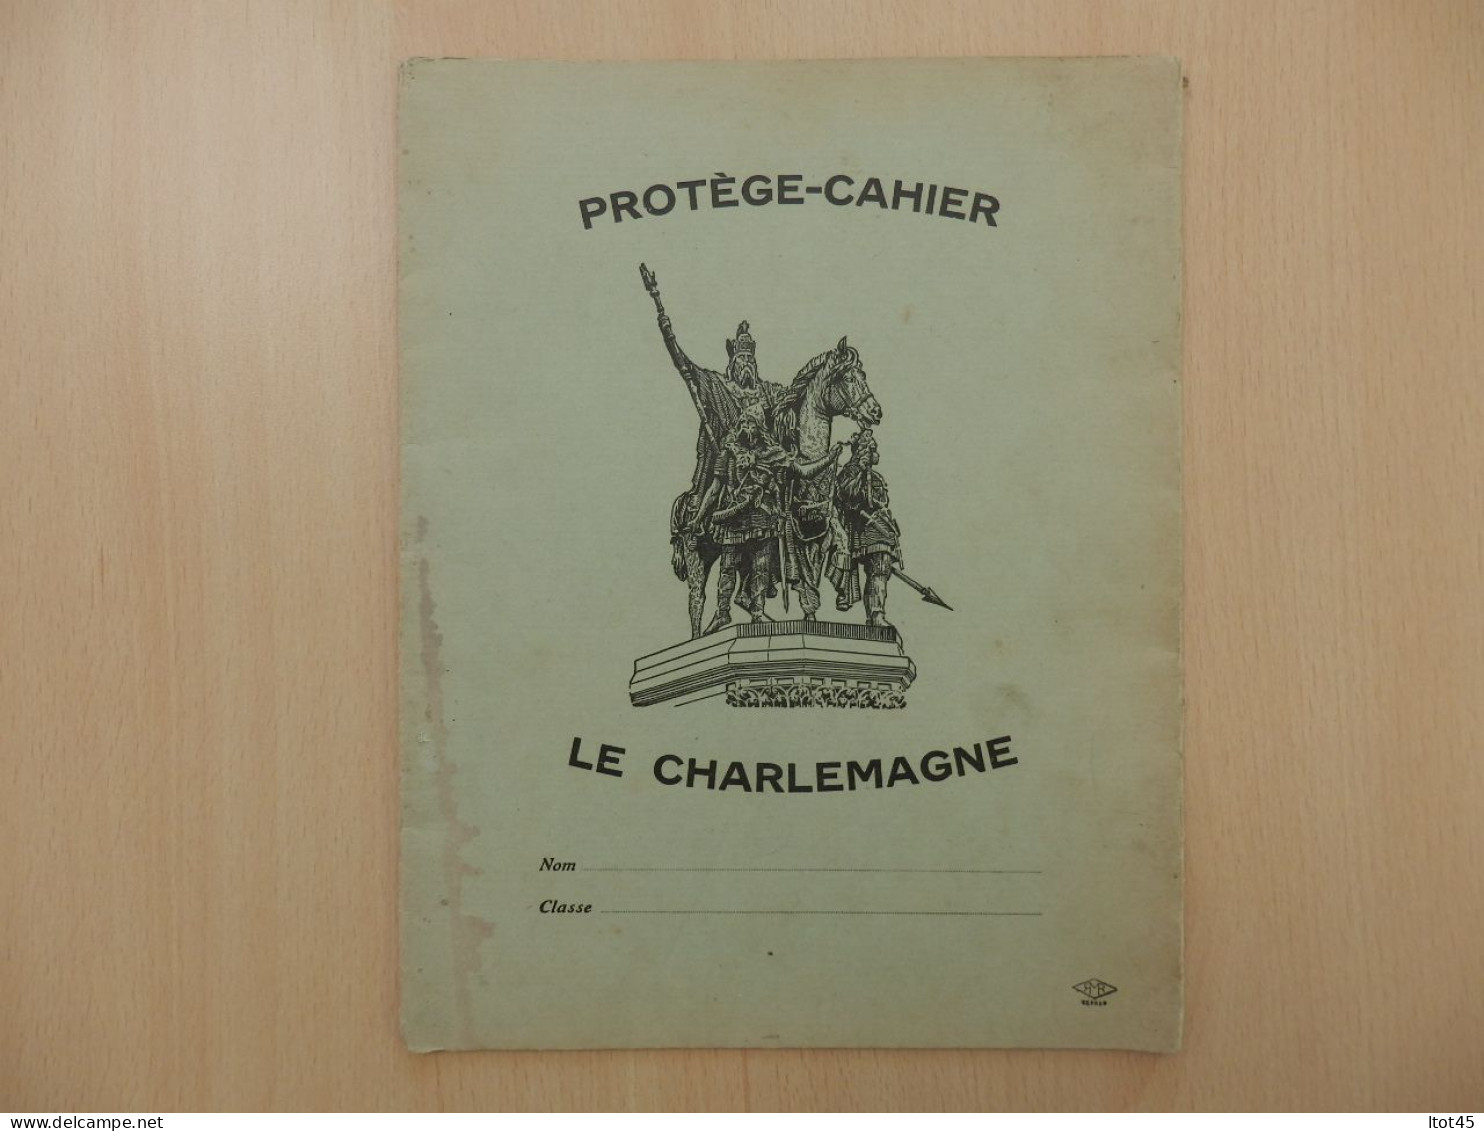 PROTEGE-CAHIER LE CHARLEMAGNE - Protège-cahiers